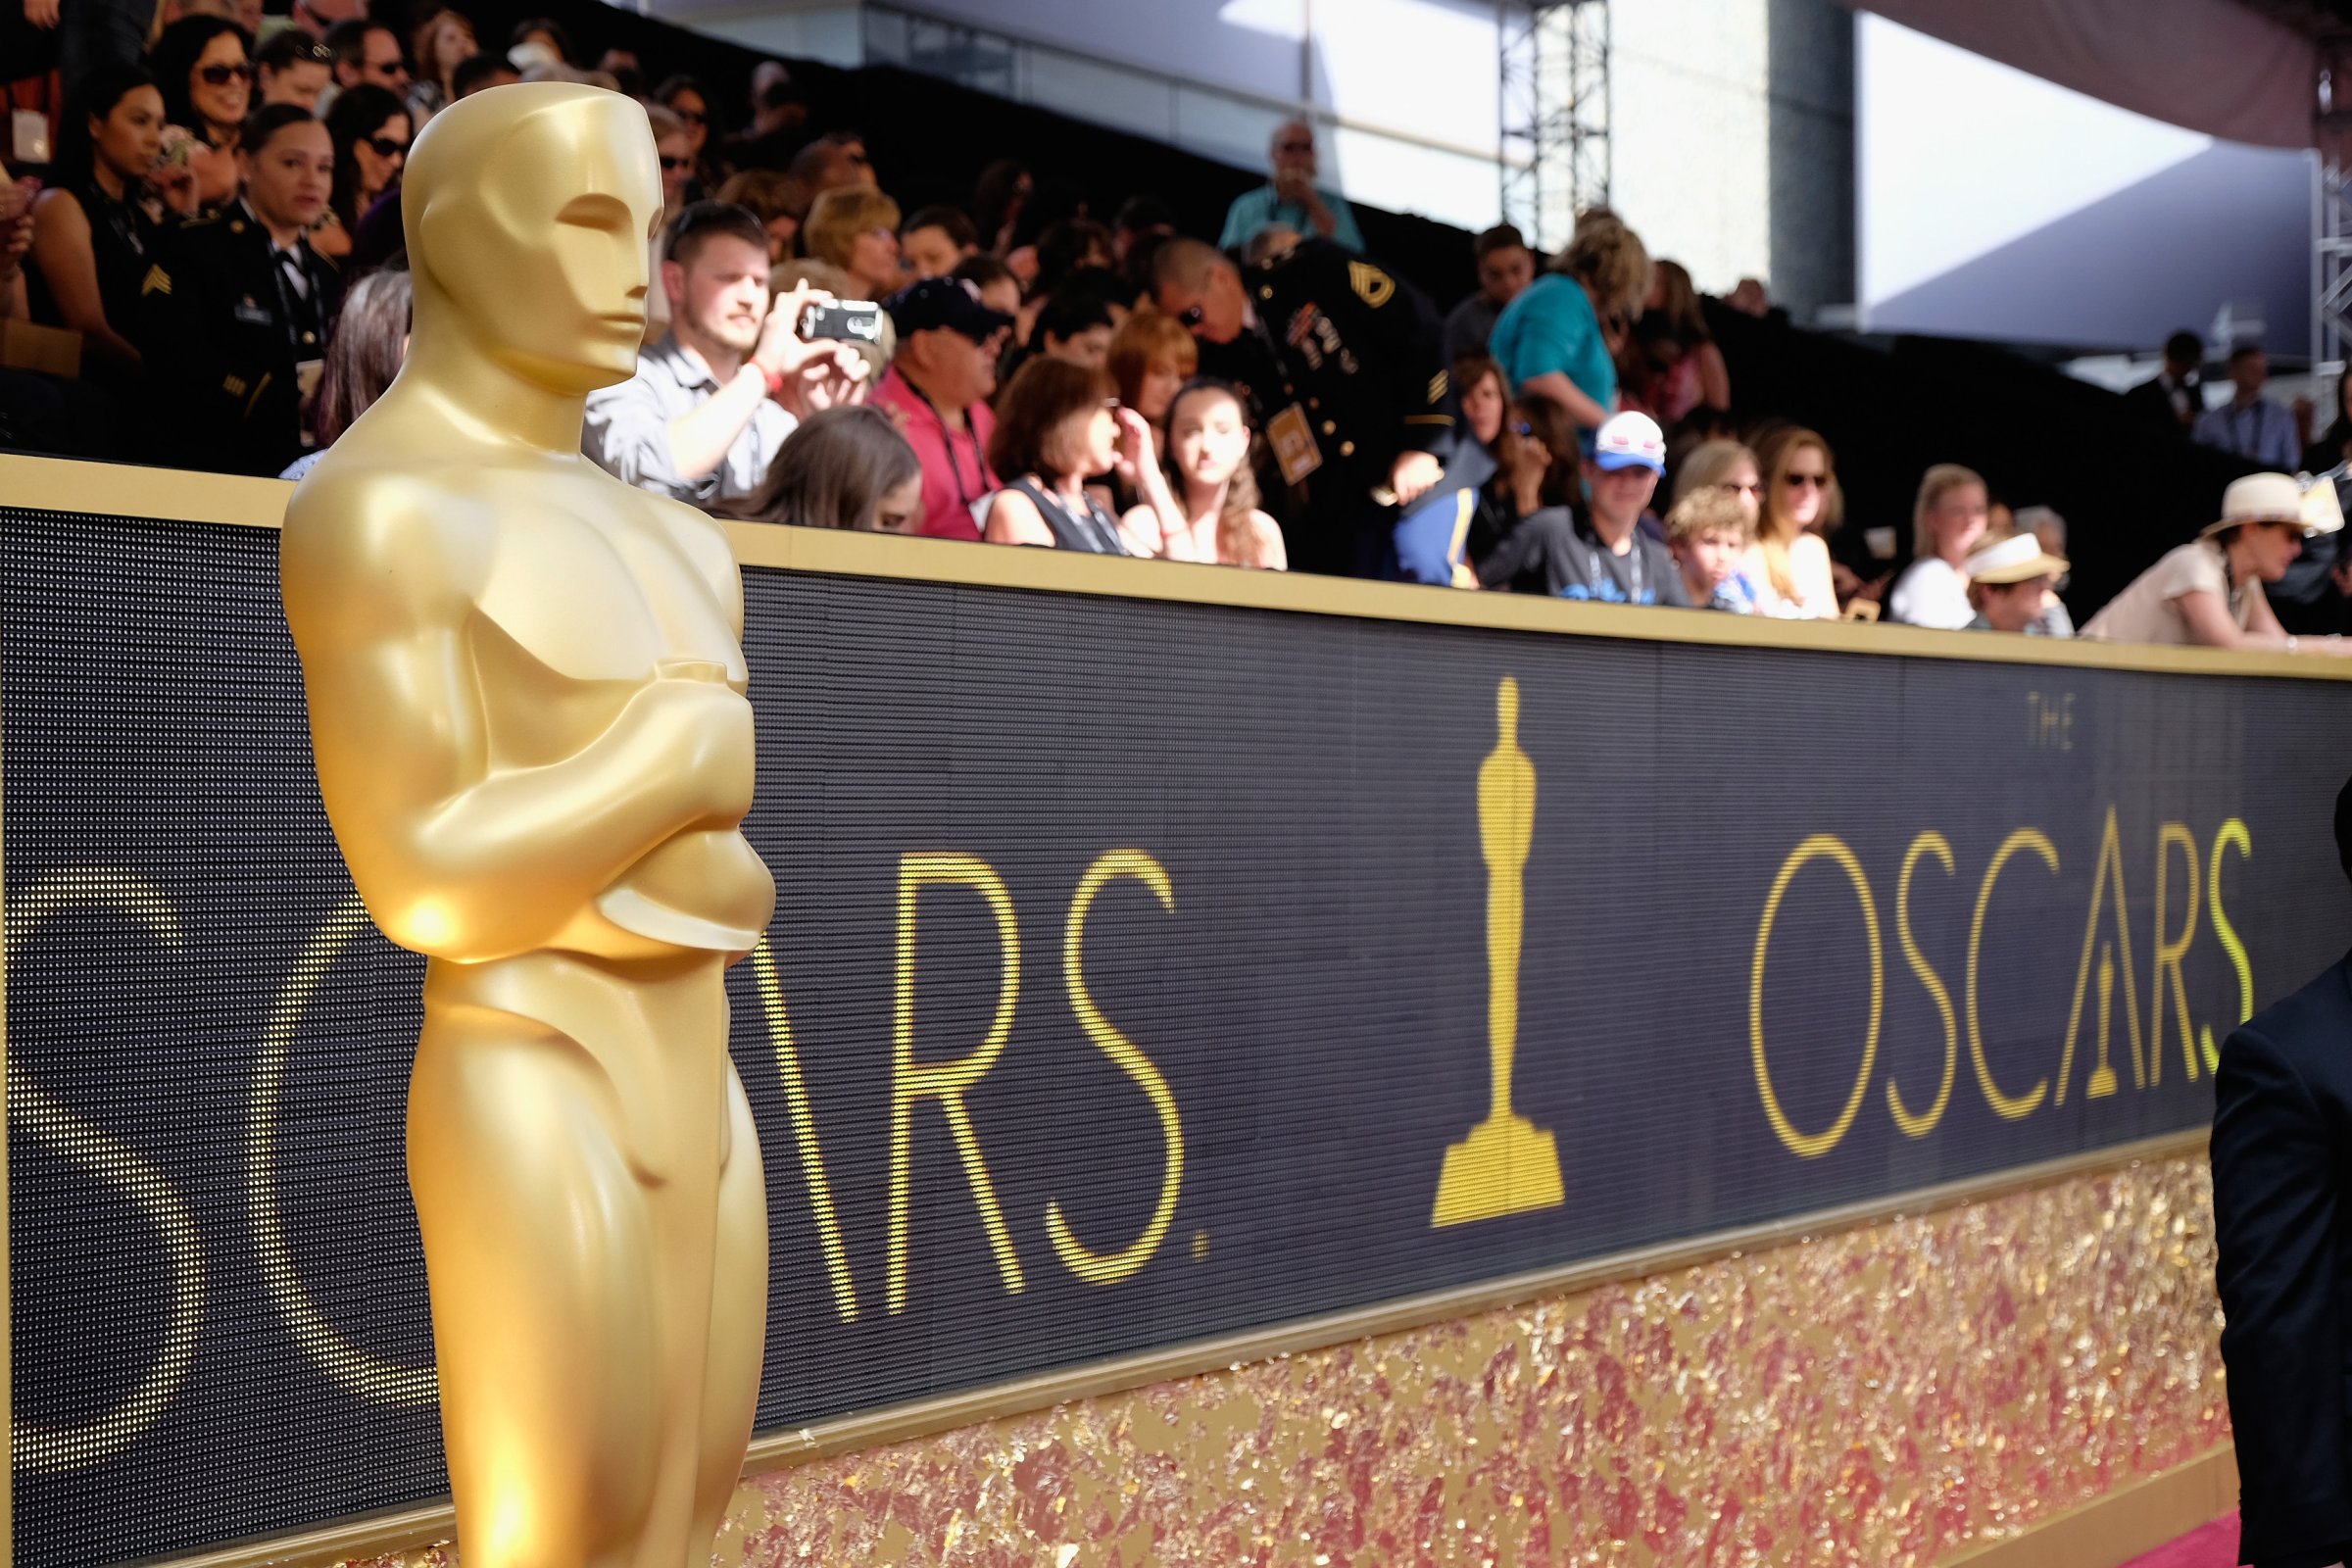 The Oscar statuette is displayed on the red carpet during the 88th Annual Academy Awards at Hollywood & Highland Center on February 28, 2016 in Hollywood, California.